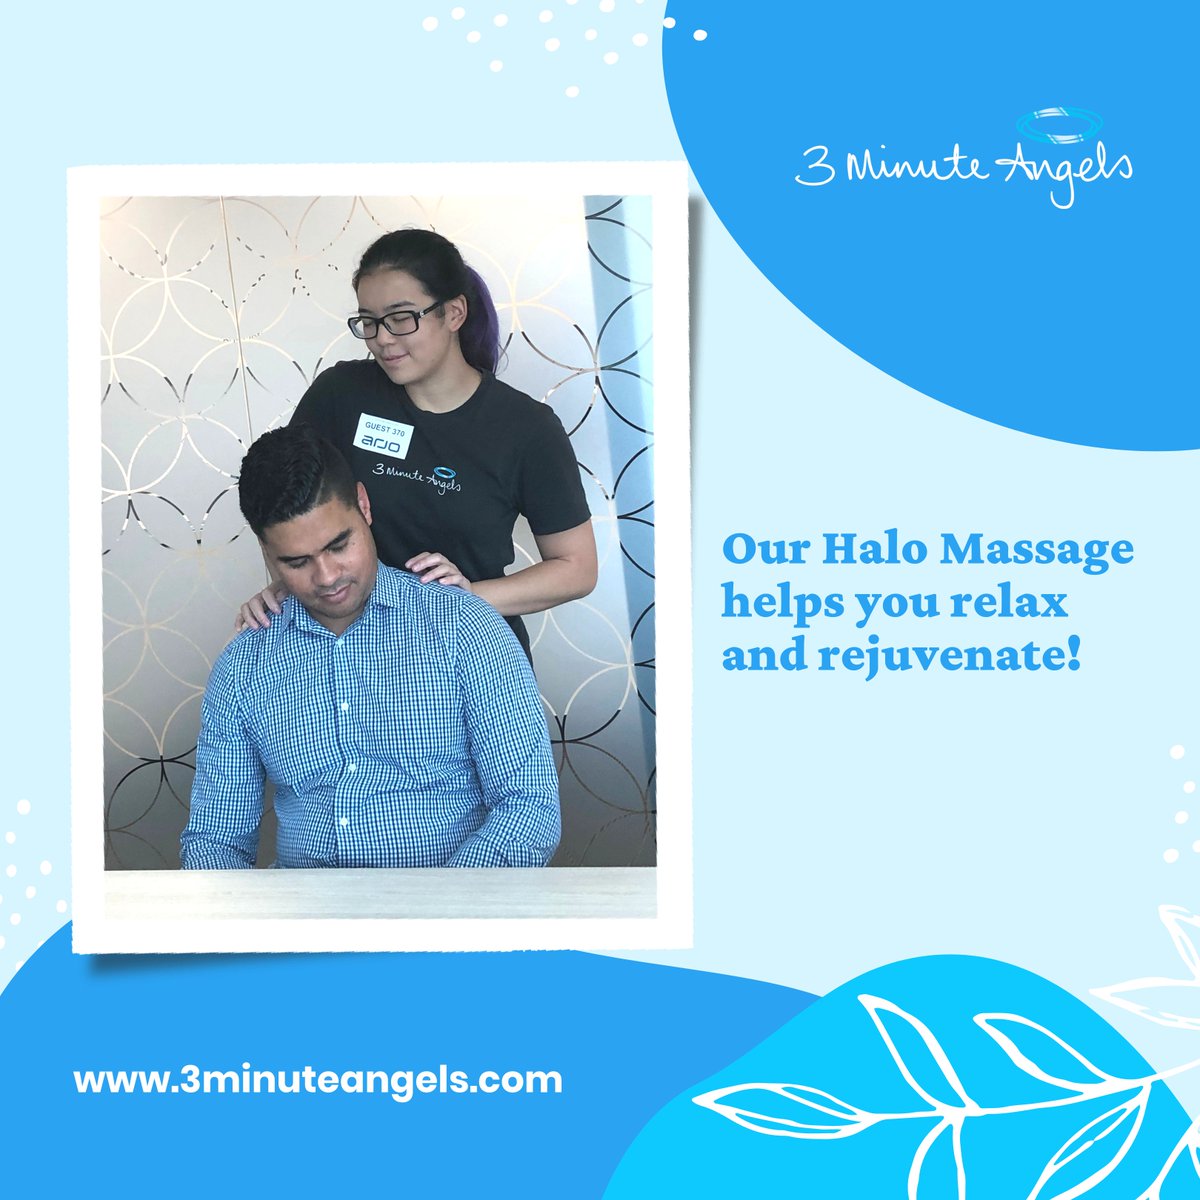 Help your staff relax and rejuvenate with our Halo Massages.😇Book today bit.ly/3maservAU or call us on 1300 662 022
#feelgood #massagesatwork #workmassage #corporatelife #work #rejuvenateyourbody #rejuvenateyourmind #destress #3MinuteAngels #HaloMassage #corporatemassage.